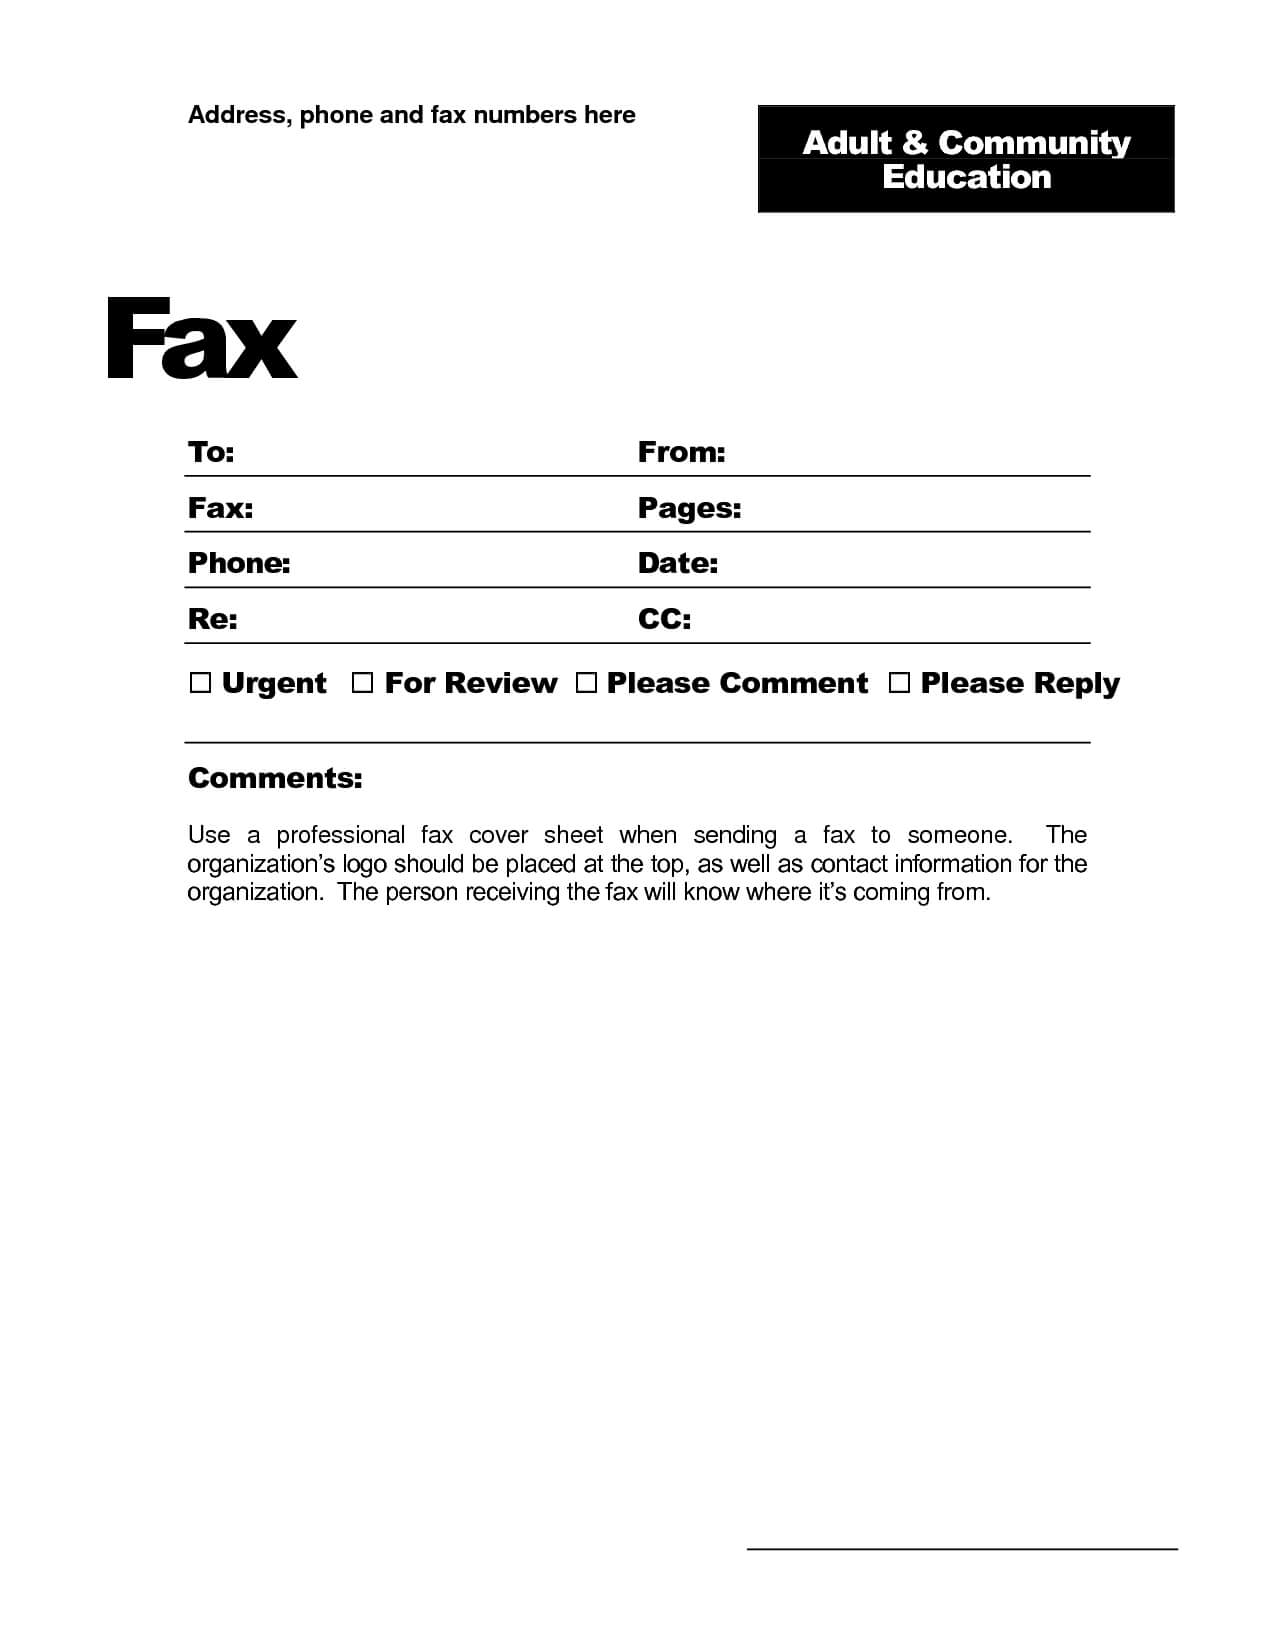 Fax Template Word 2010 - Free Download With Regard To Fax Template Word 2010